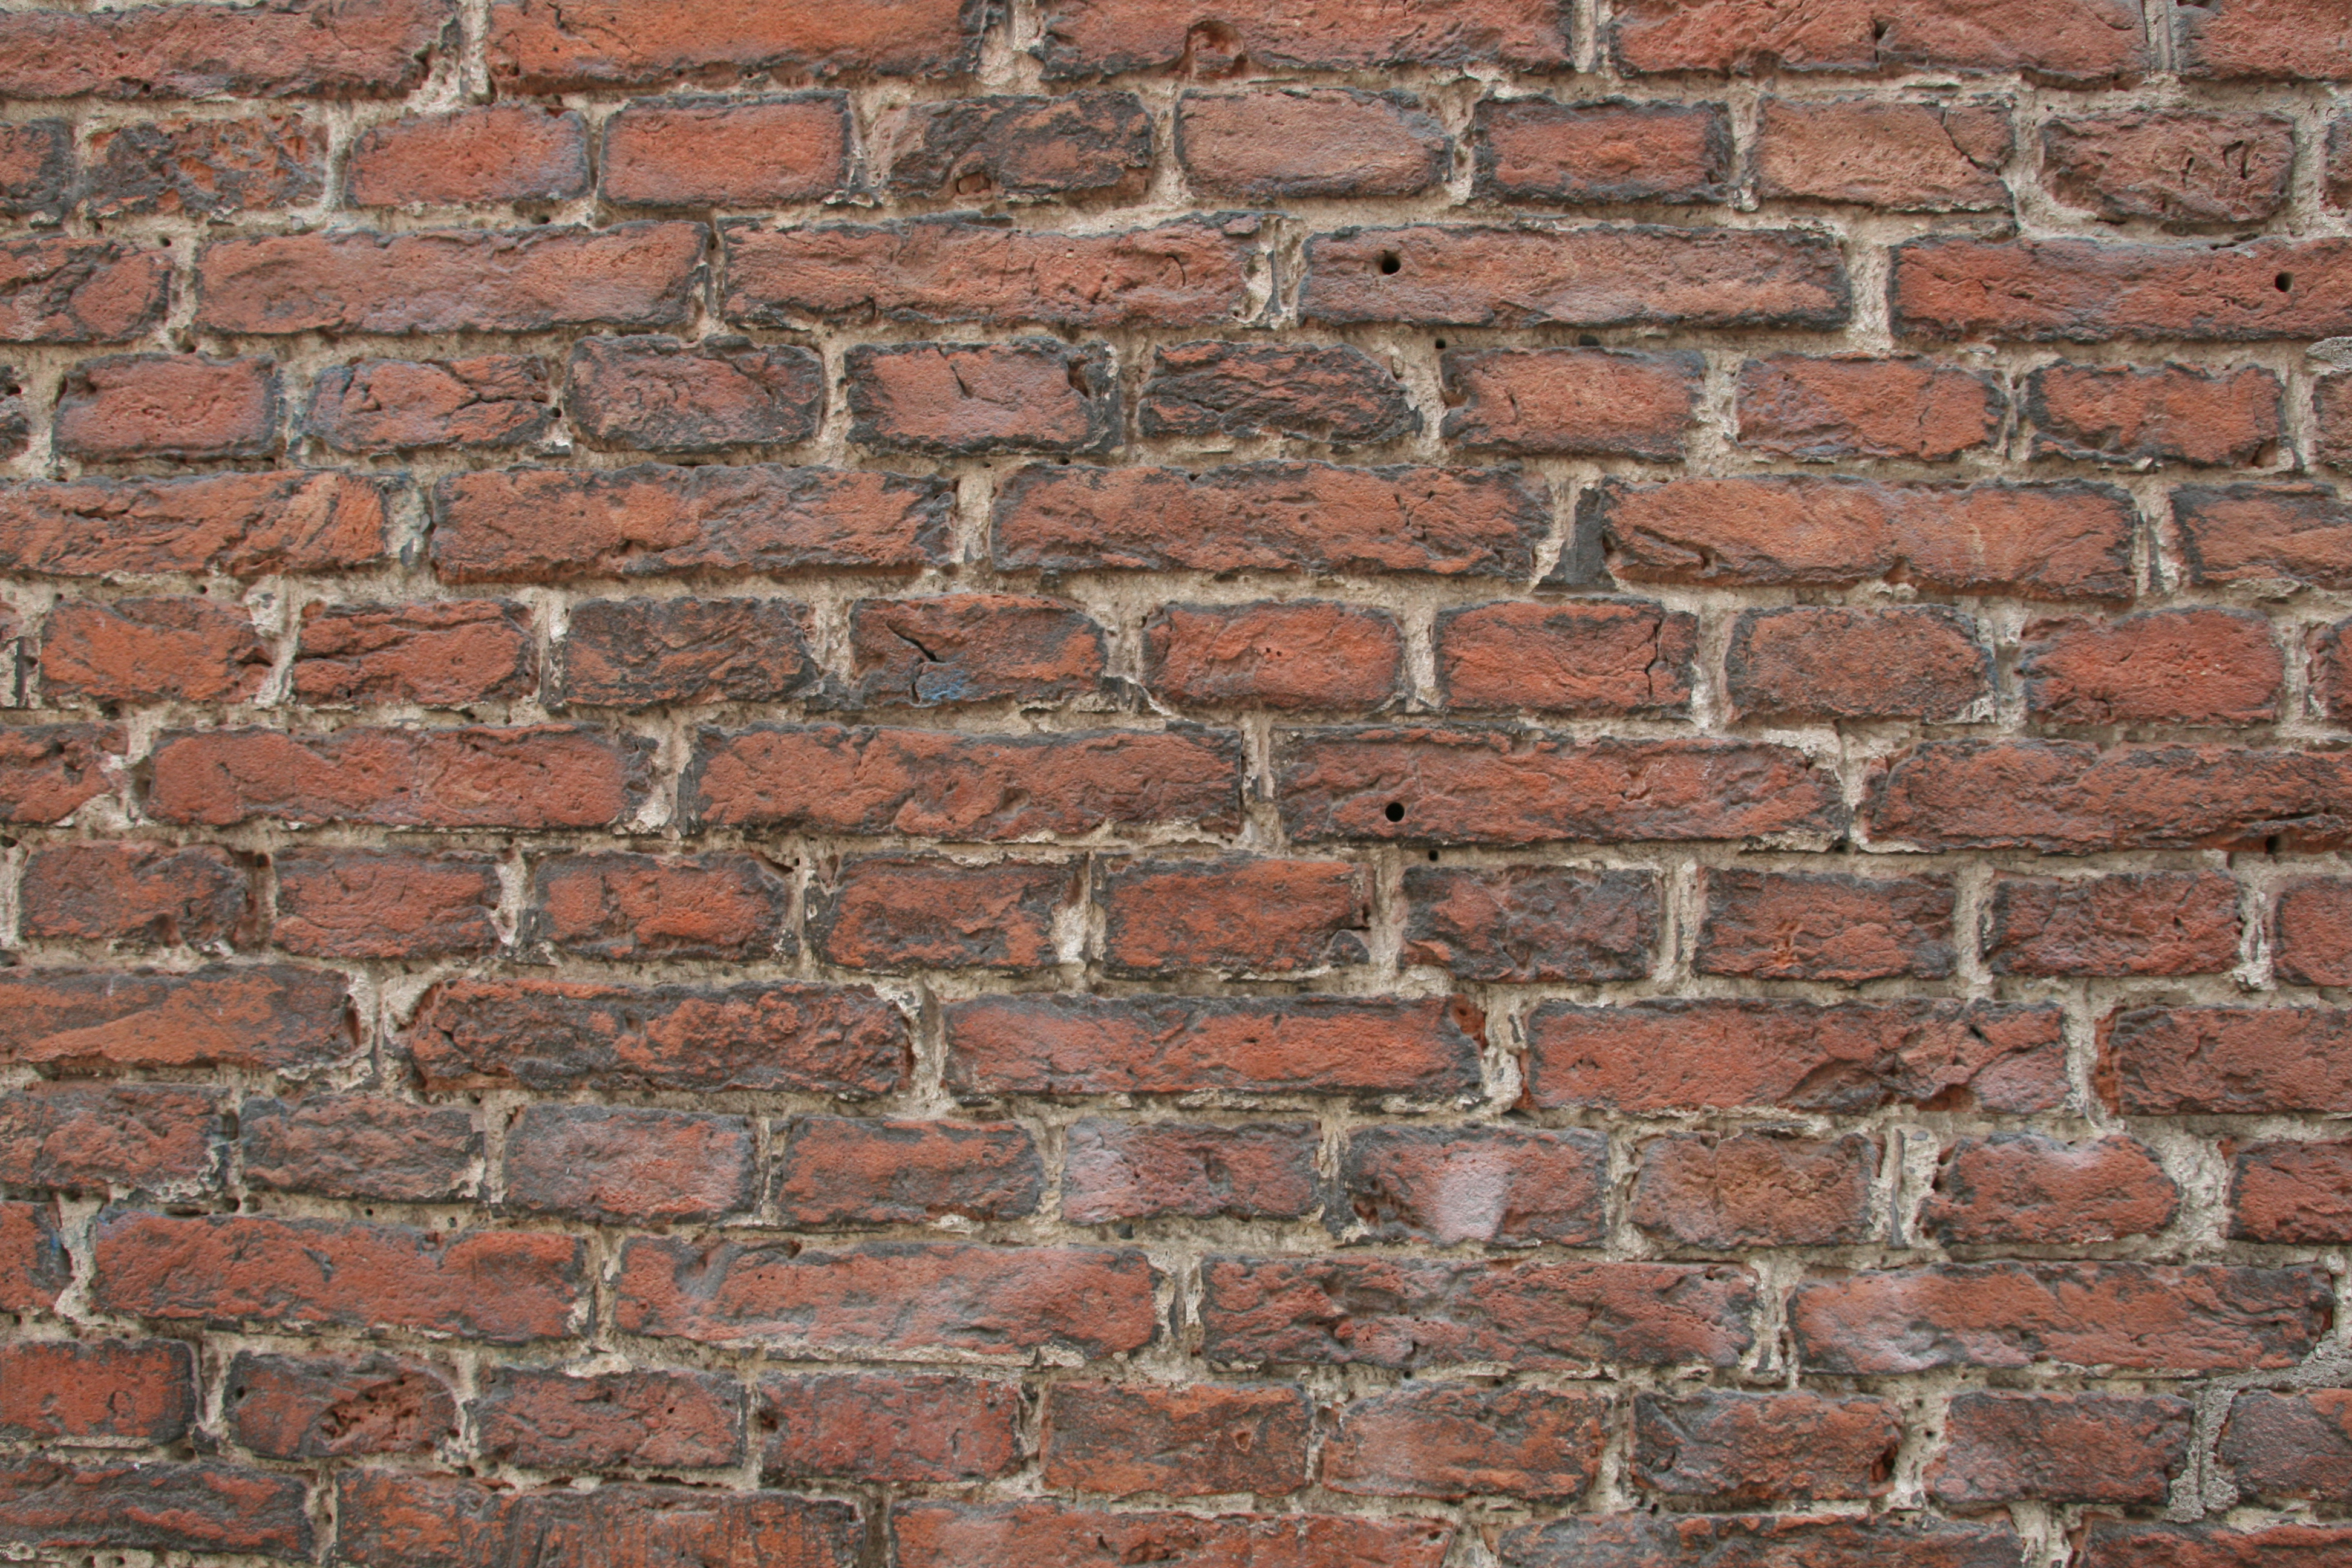 High Quality Old Brick Wall With Dirty Mortar Textures - Brick Wall ...